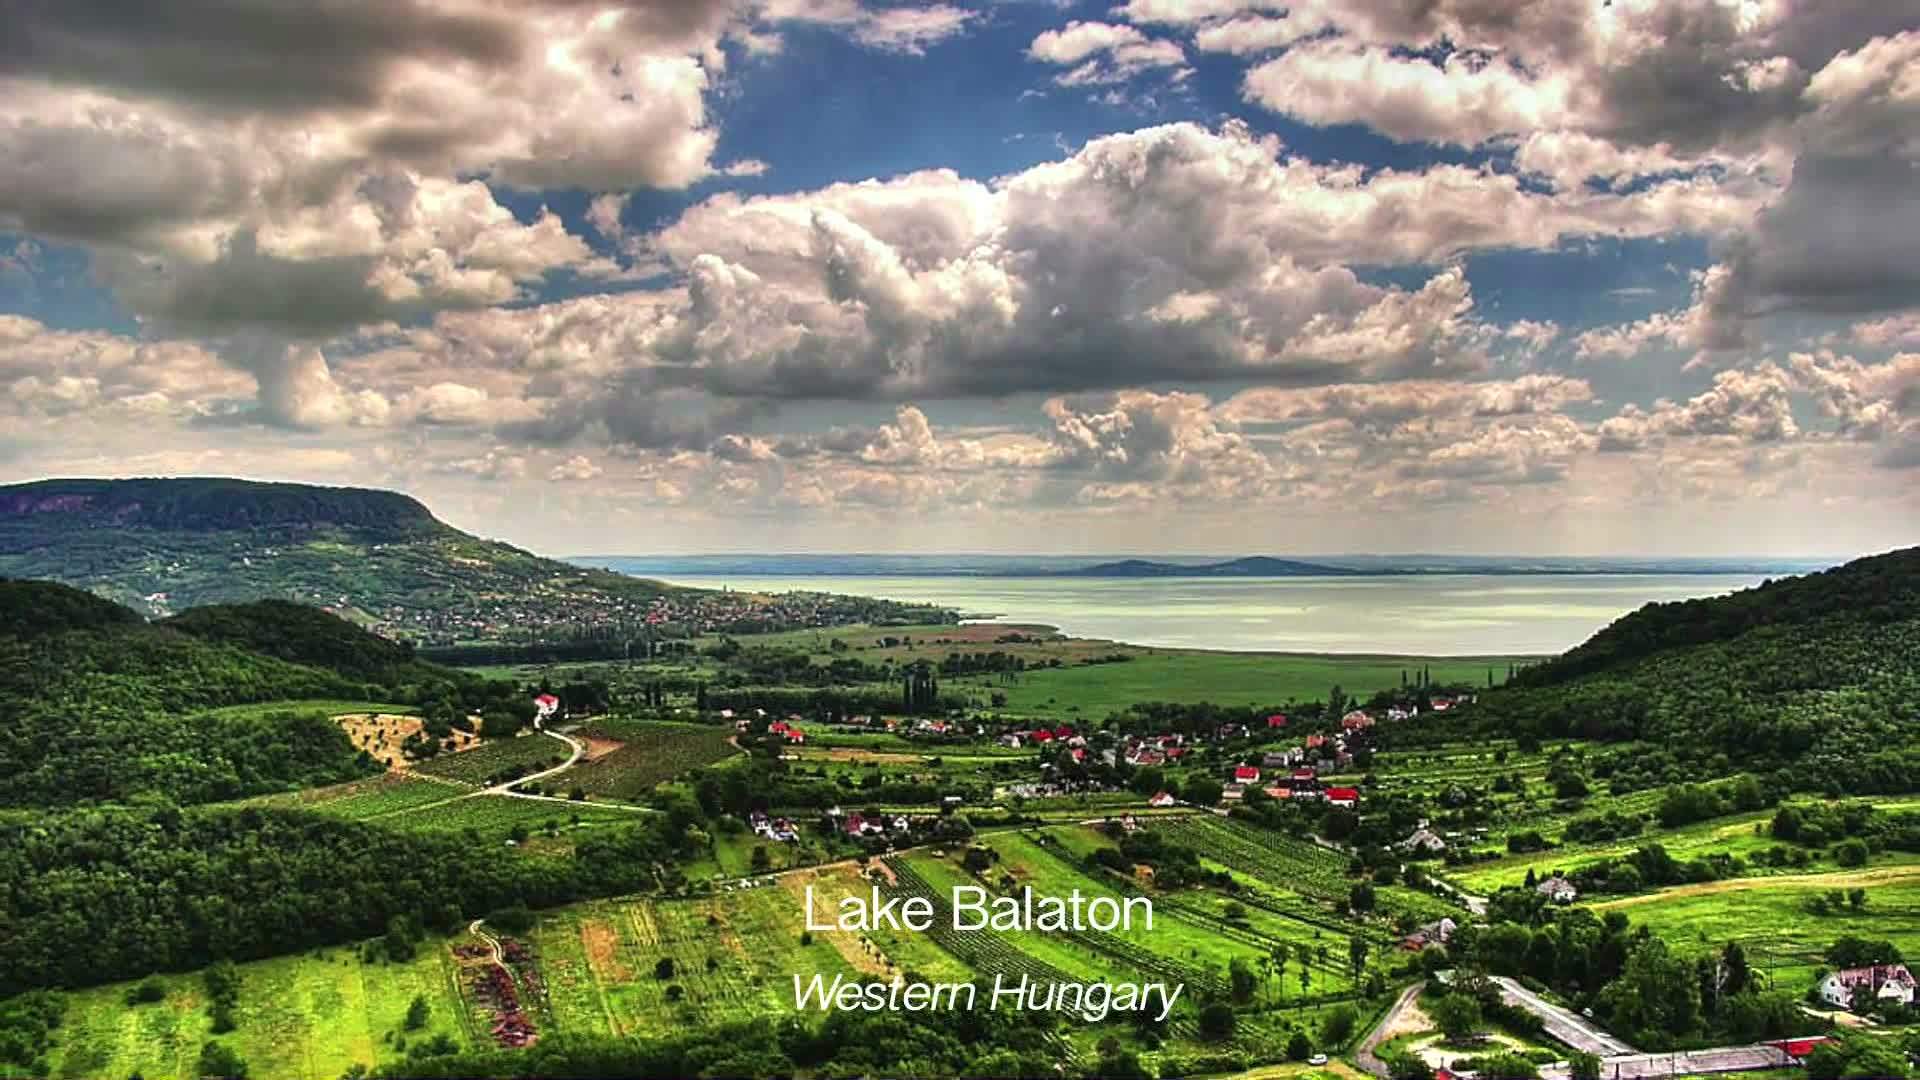 The Geography and Culture of Hungary